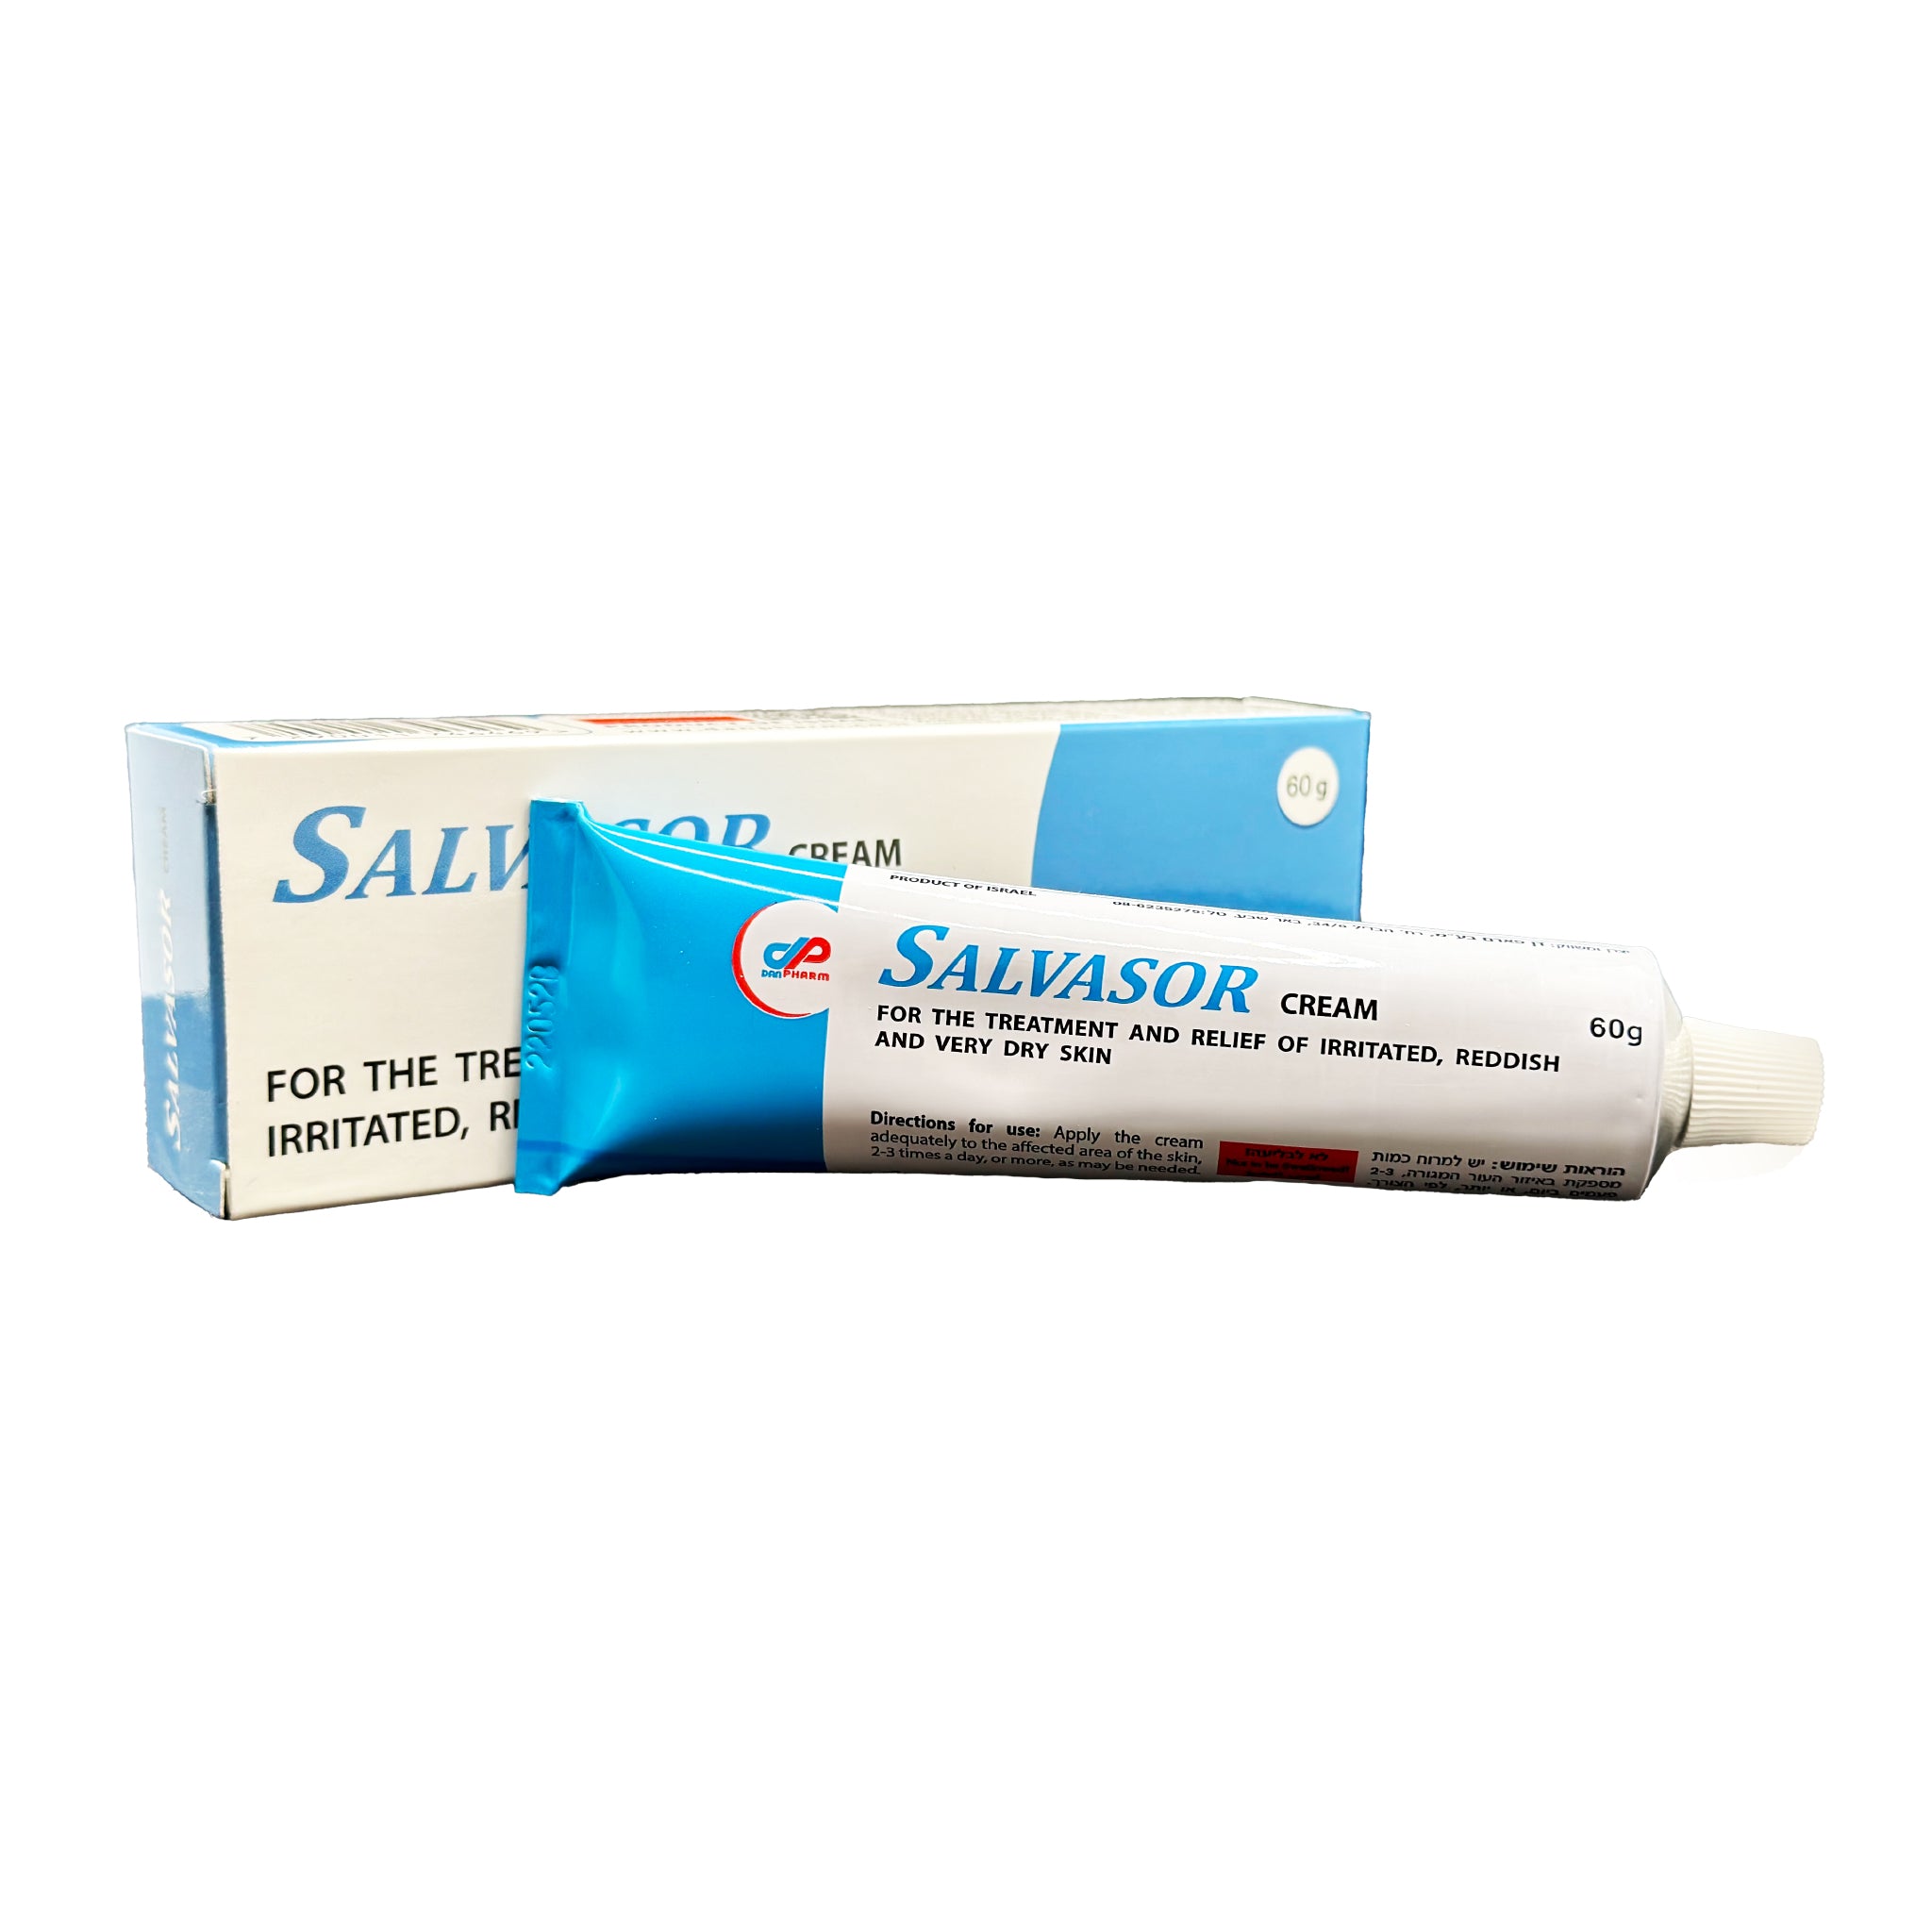 Salvasor Skin Treatment Cream - Eczema Psoriasis Cream for Dry, Itchy, Rough and Irritated Skin - Reduces Appearance of Skin Redness